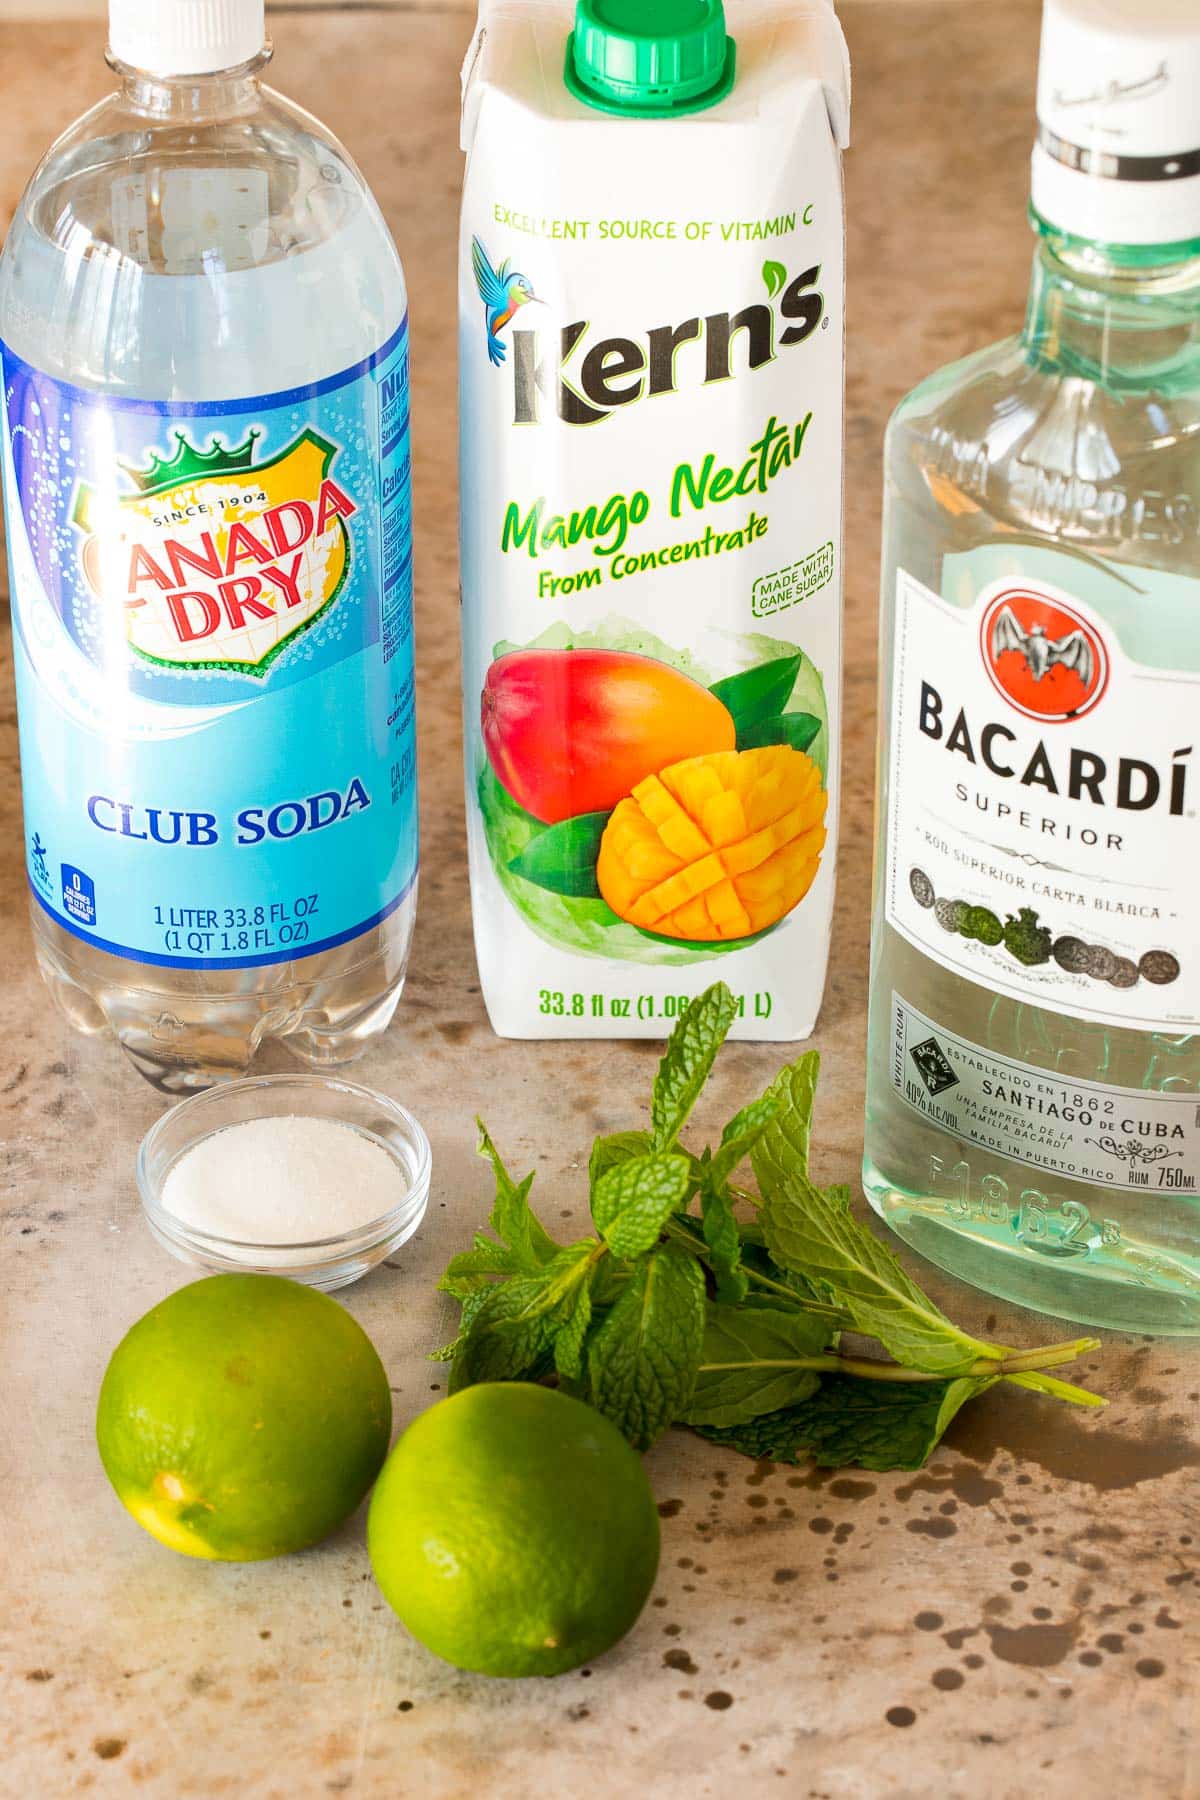 Bottles of rum, mango nectar and club soda with limes, sugar and mint.